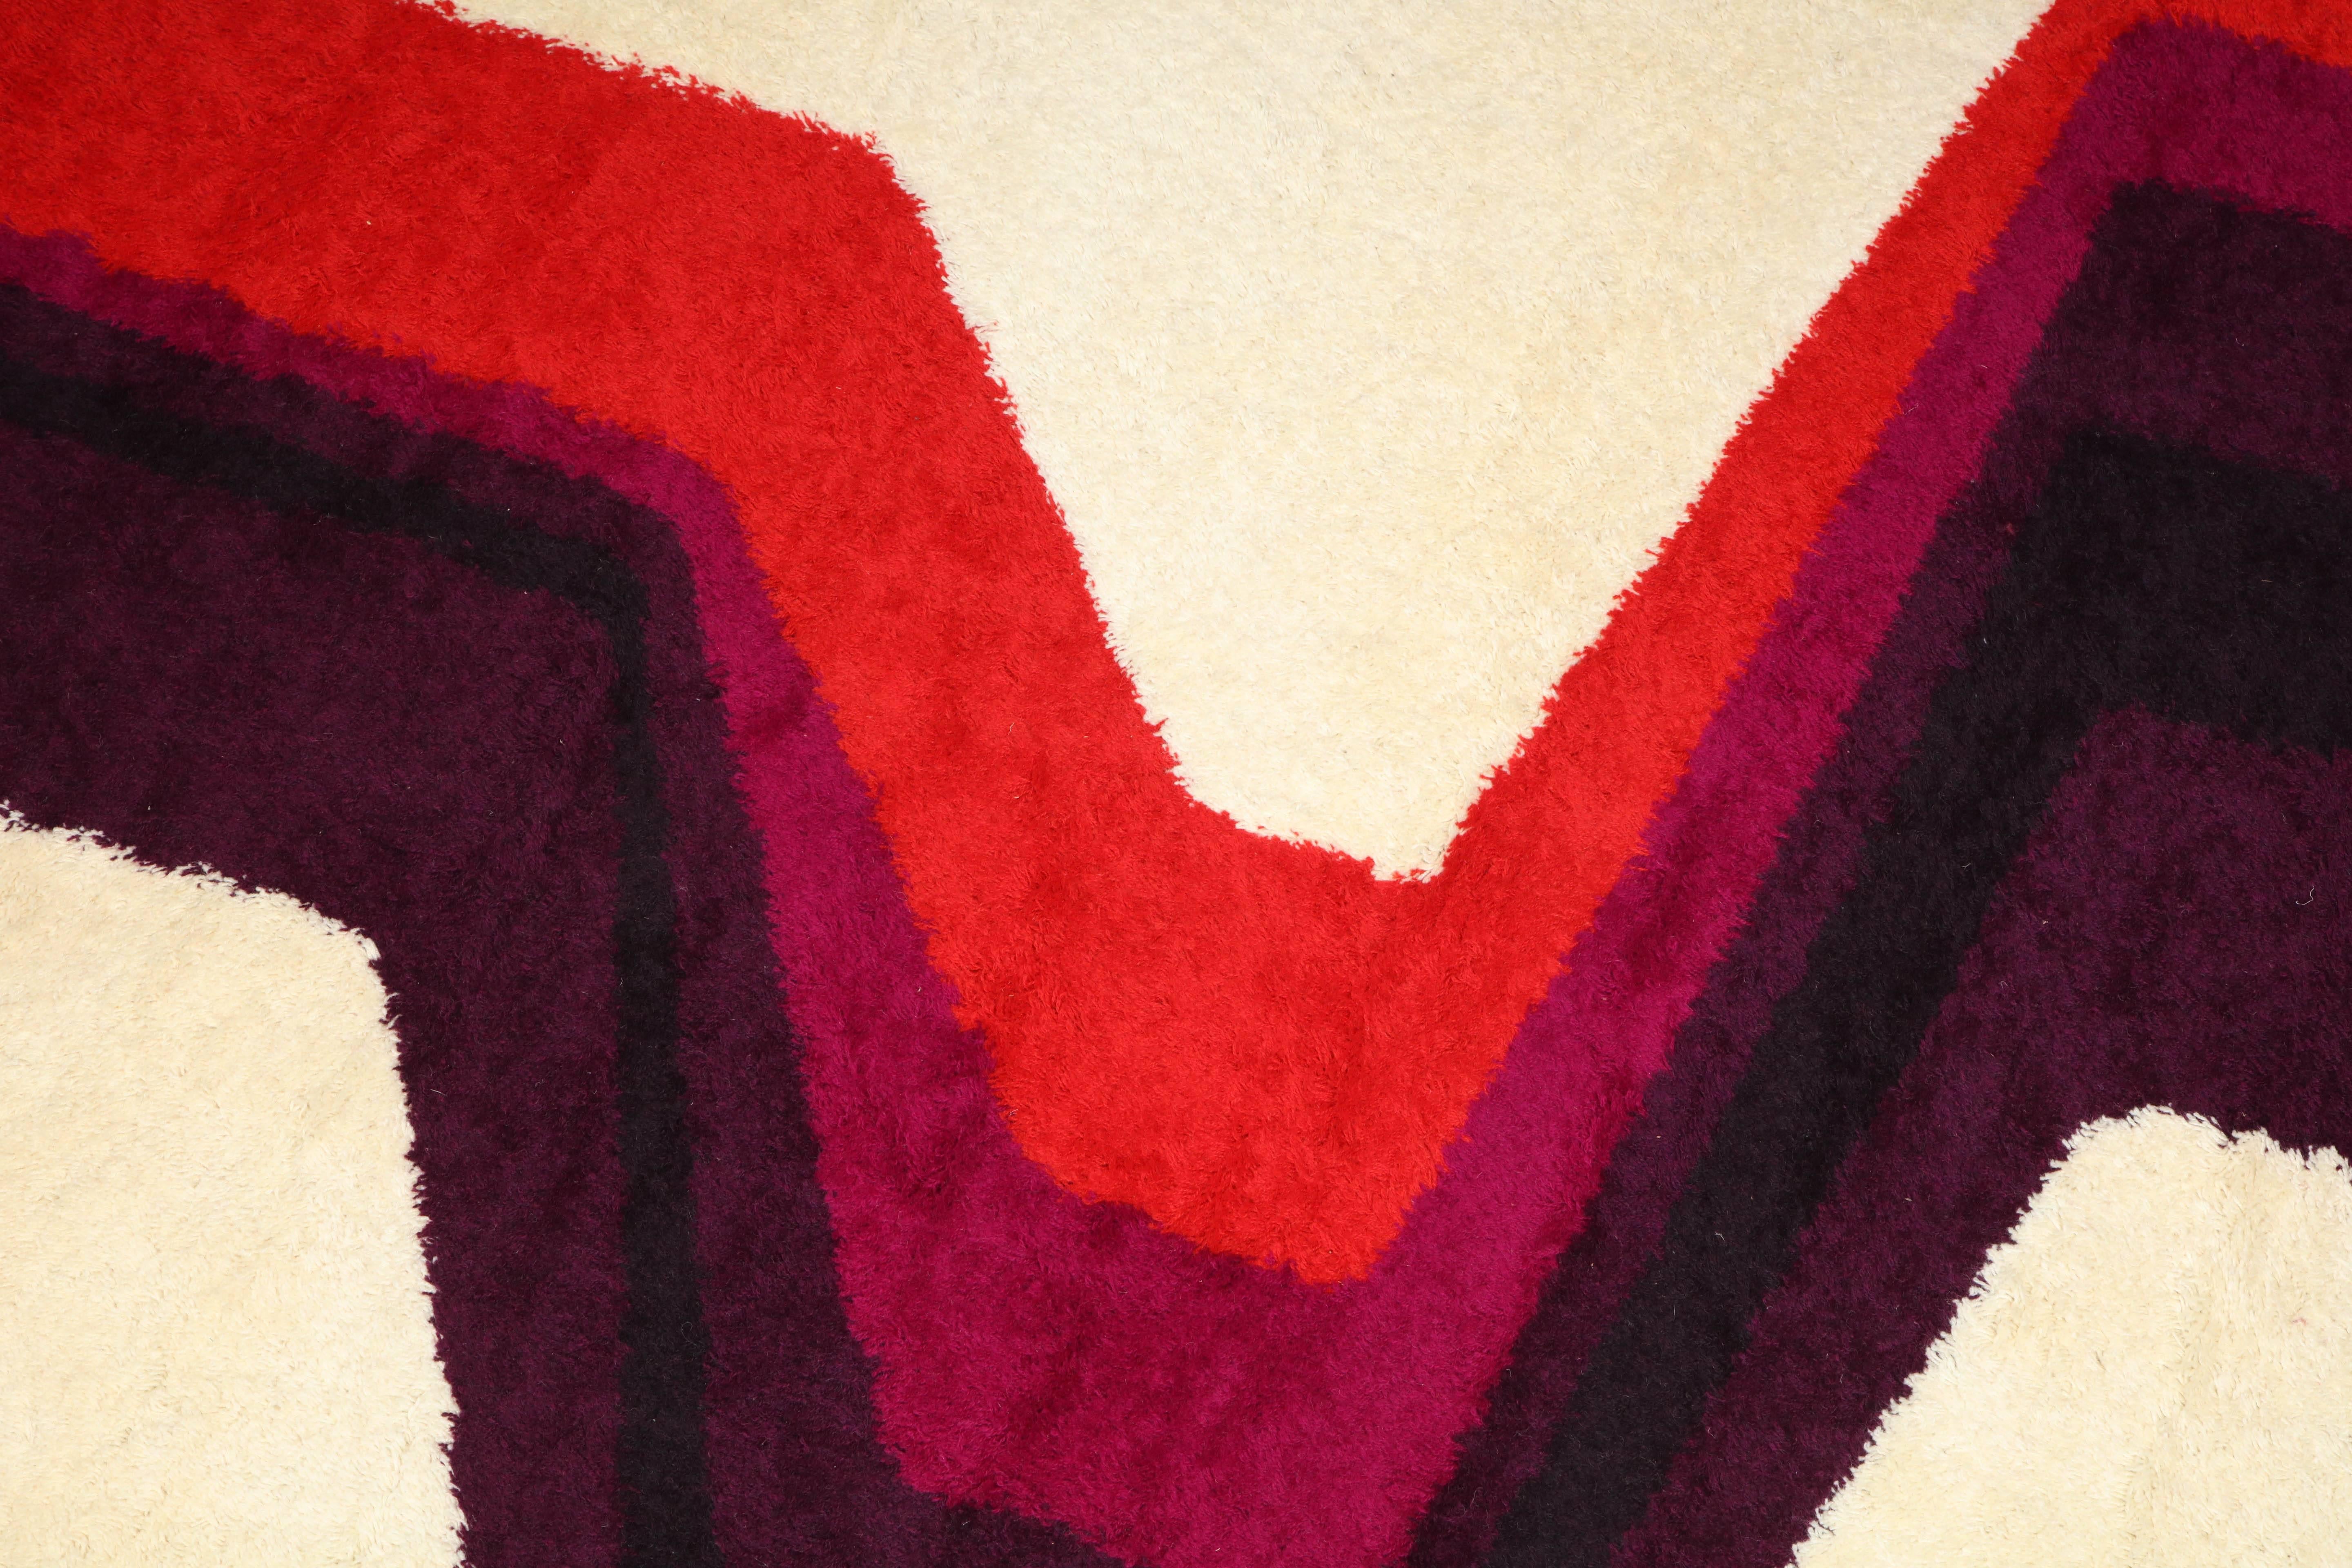 Hojer Eksport Wilton carpet made in Denmark, 1960, Technique created by Marguerite Rye called the Rye technique. Great graphic design in wool with bold colors of ivory ground with burgundy, plum, orange and black, signed on reverse side with